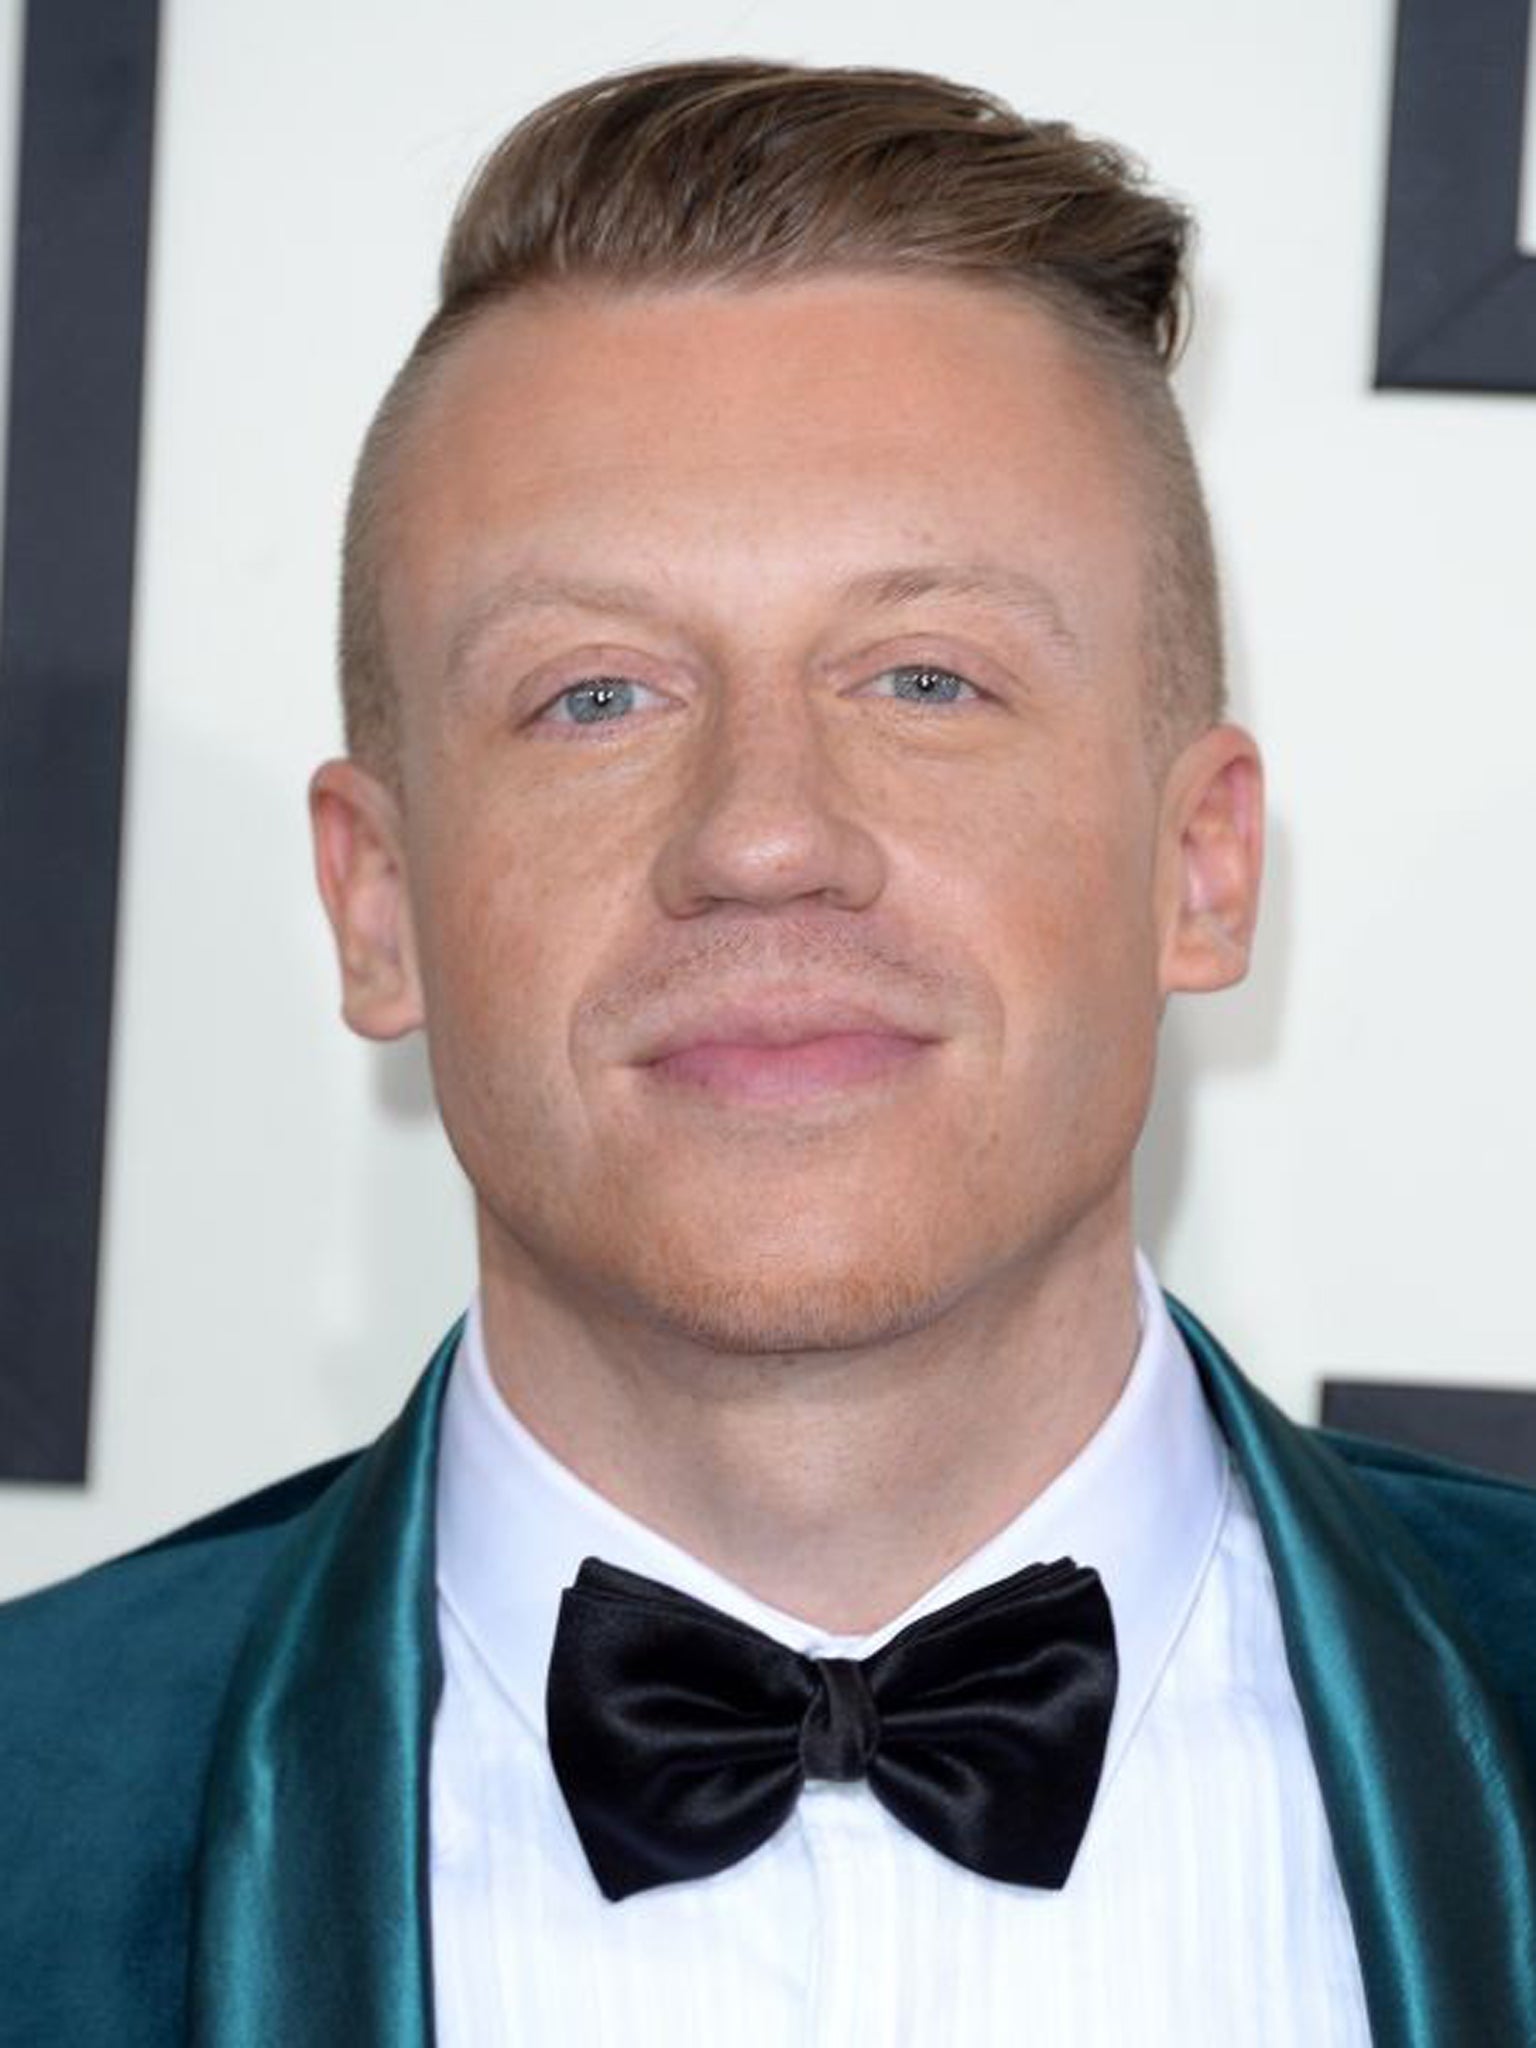 The little black dicky-bow tie and of rapper Macklemore at the Grammys